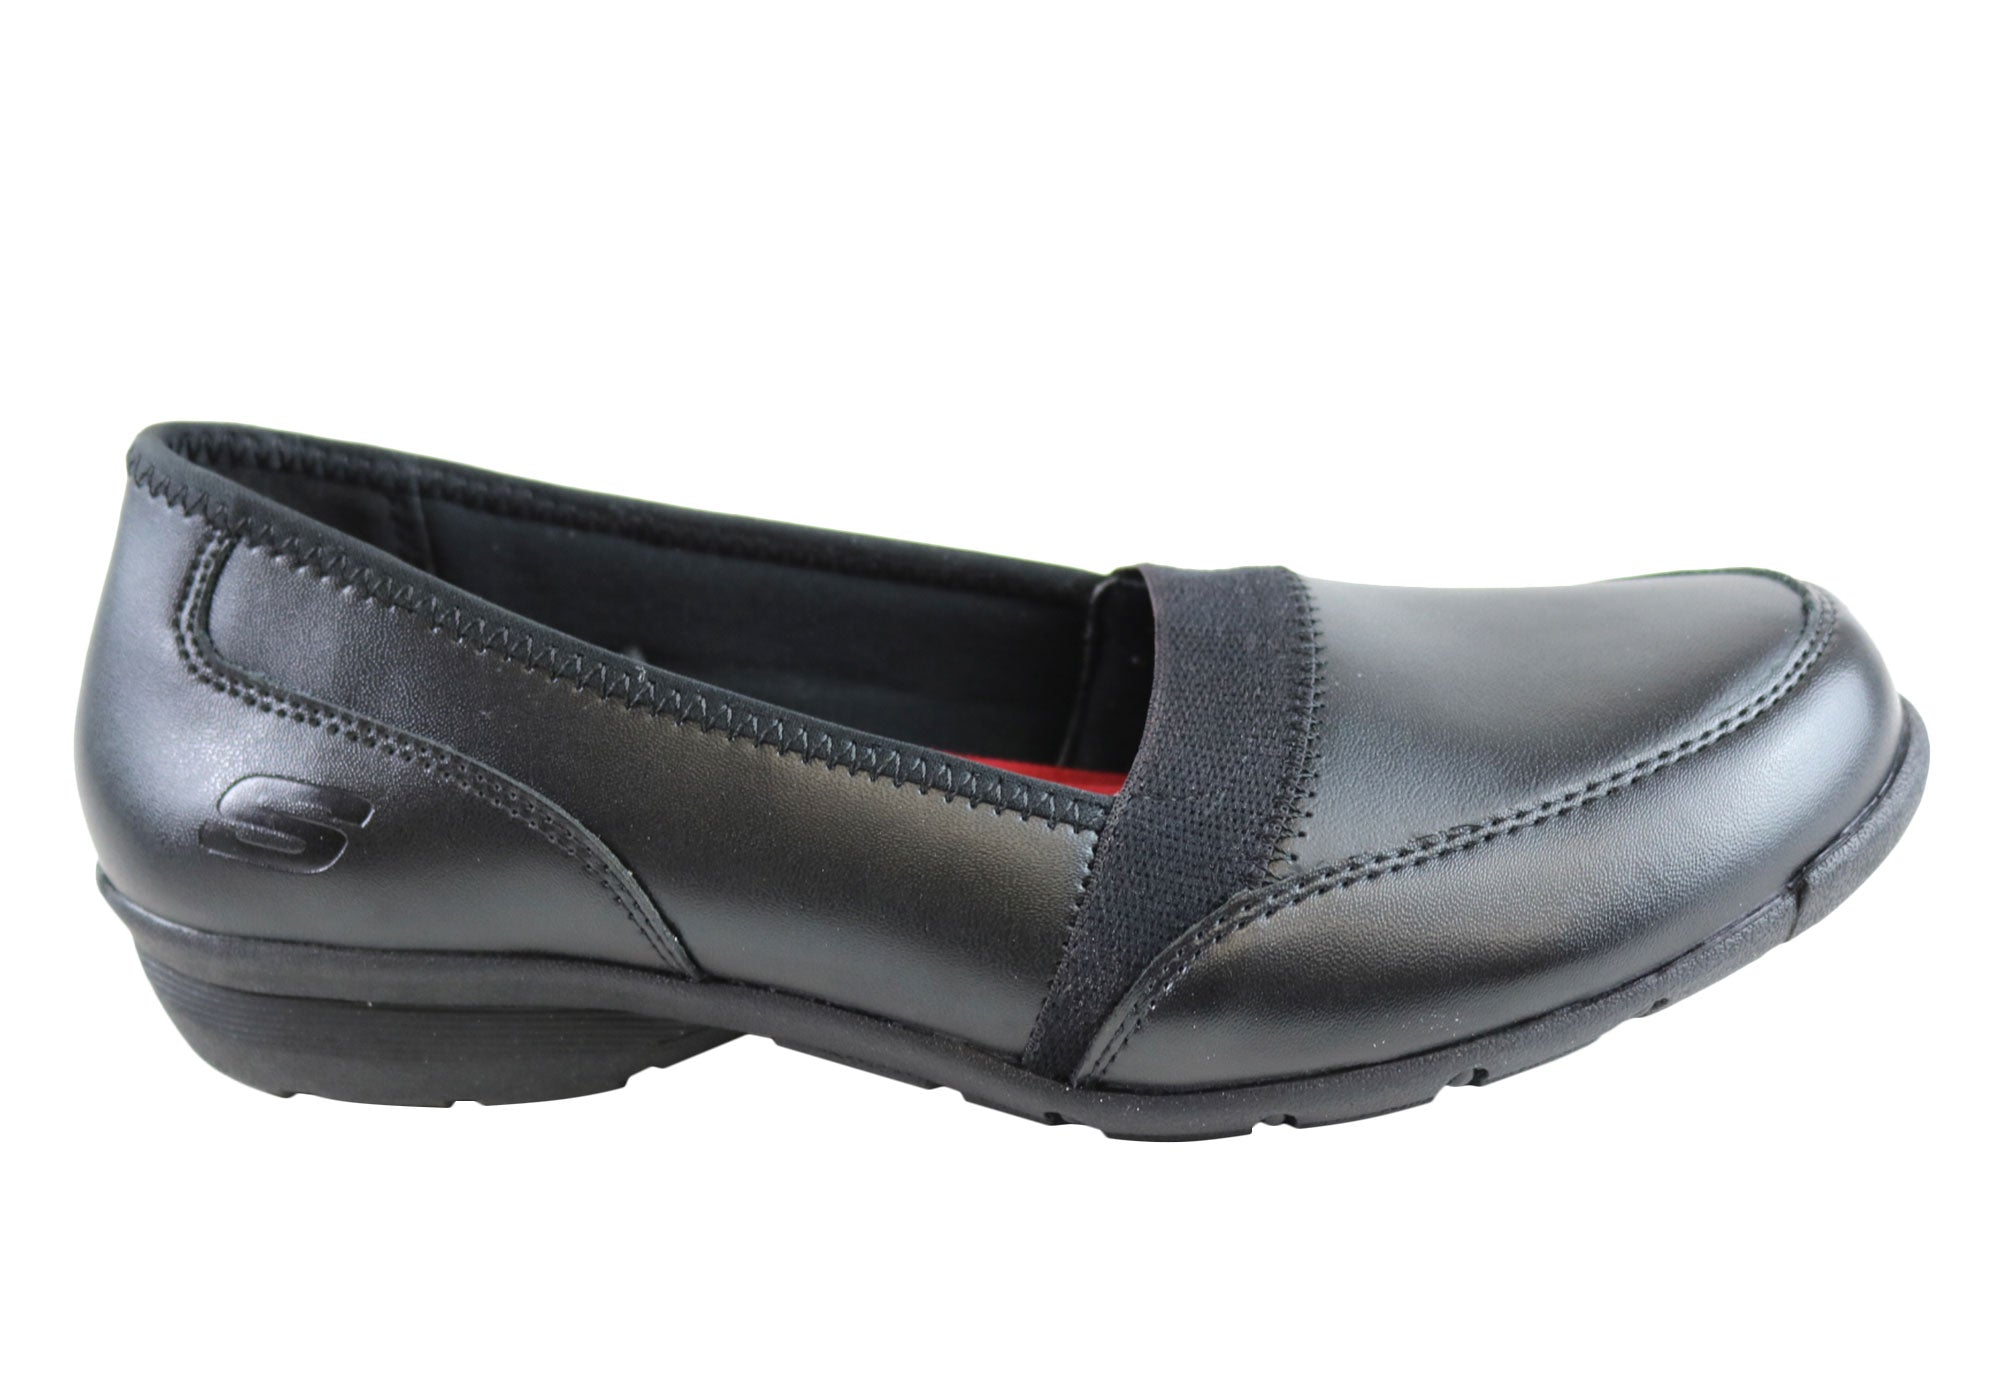 skechers black leather shoes